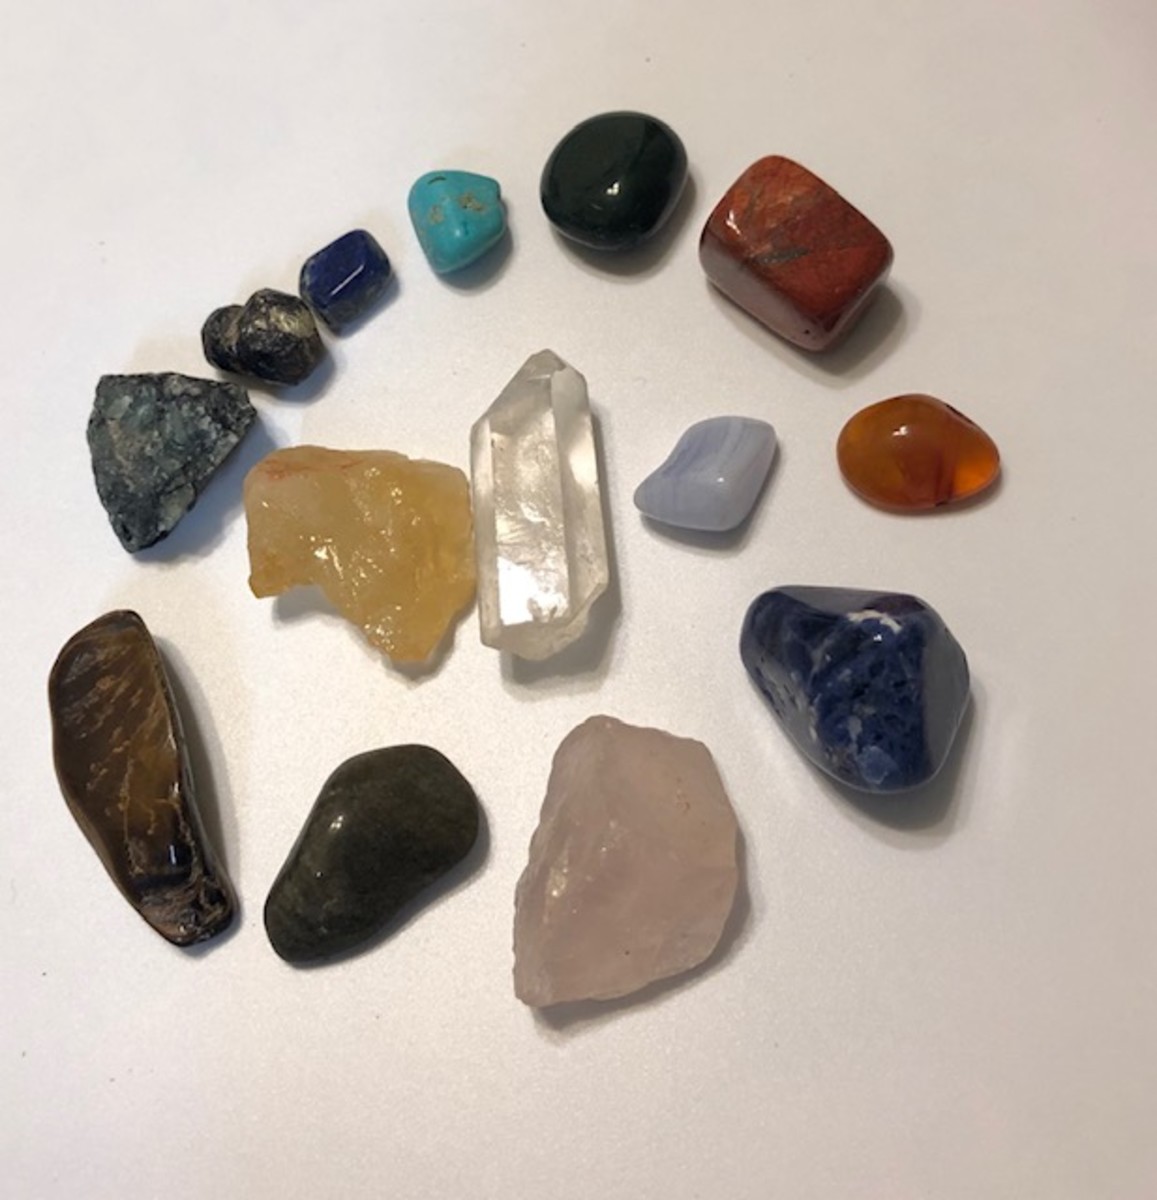 All crystals vibrate at a certain frequency, according to their color. This benefits the mind and body in a variety of ways.